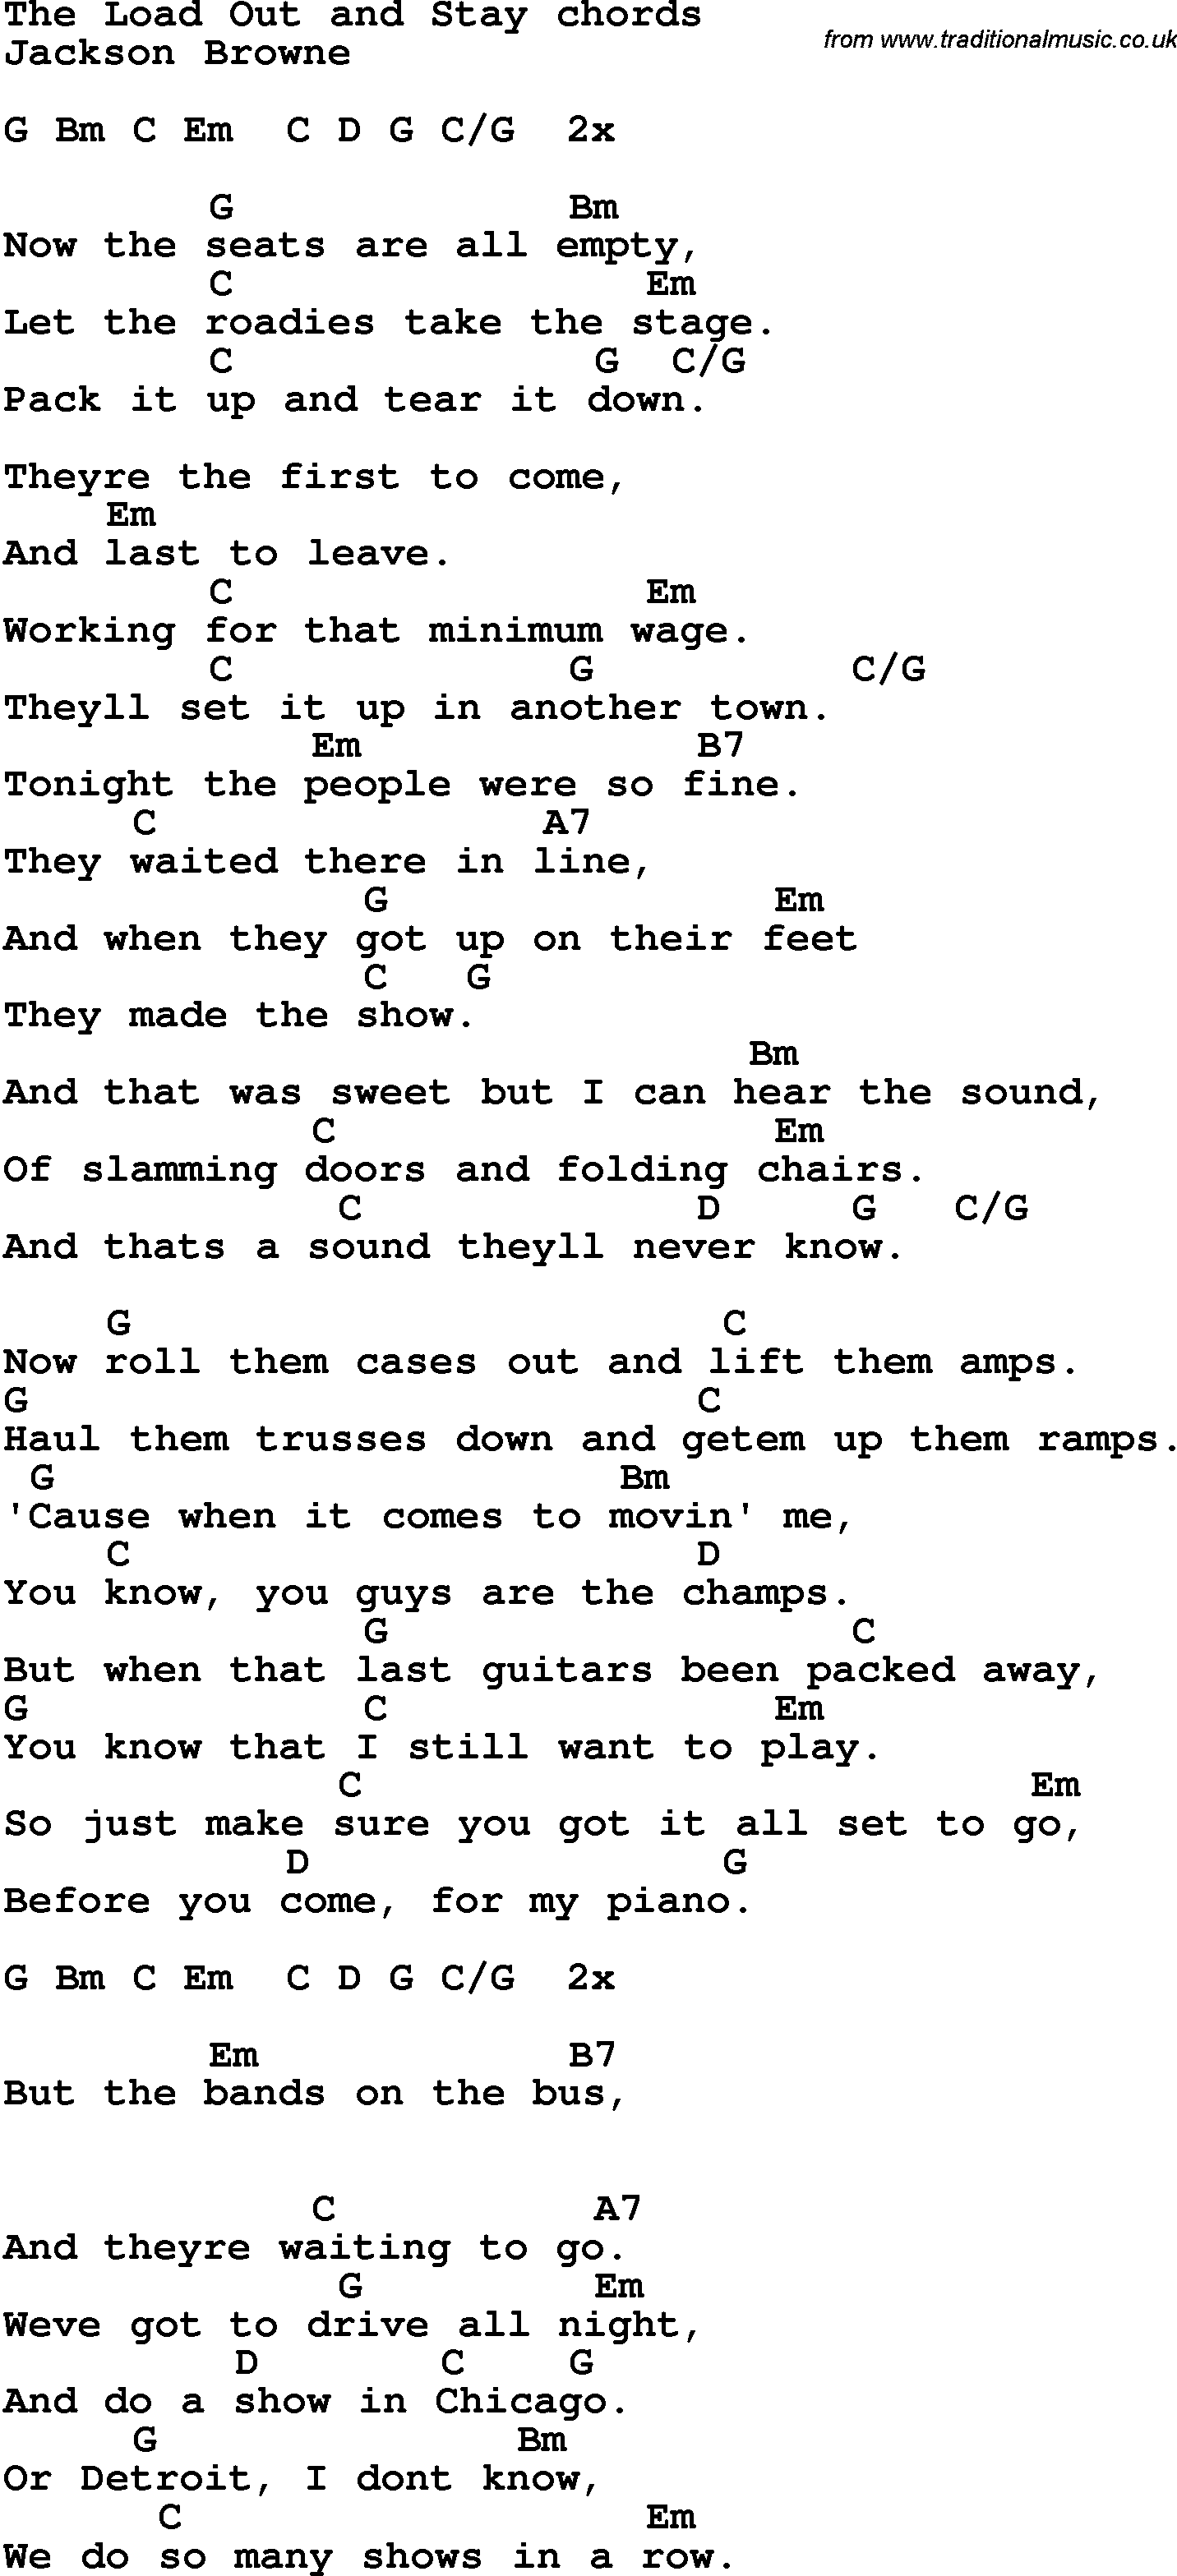 Song Lyrics with guitar chords for The Load Out And Stay